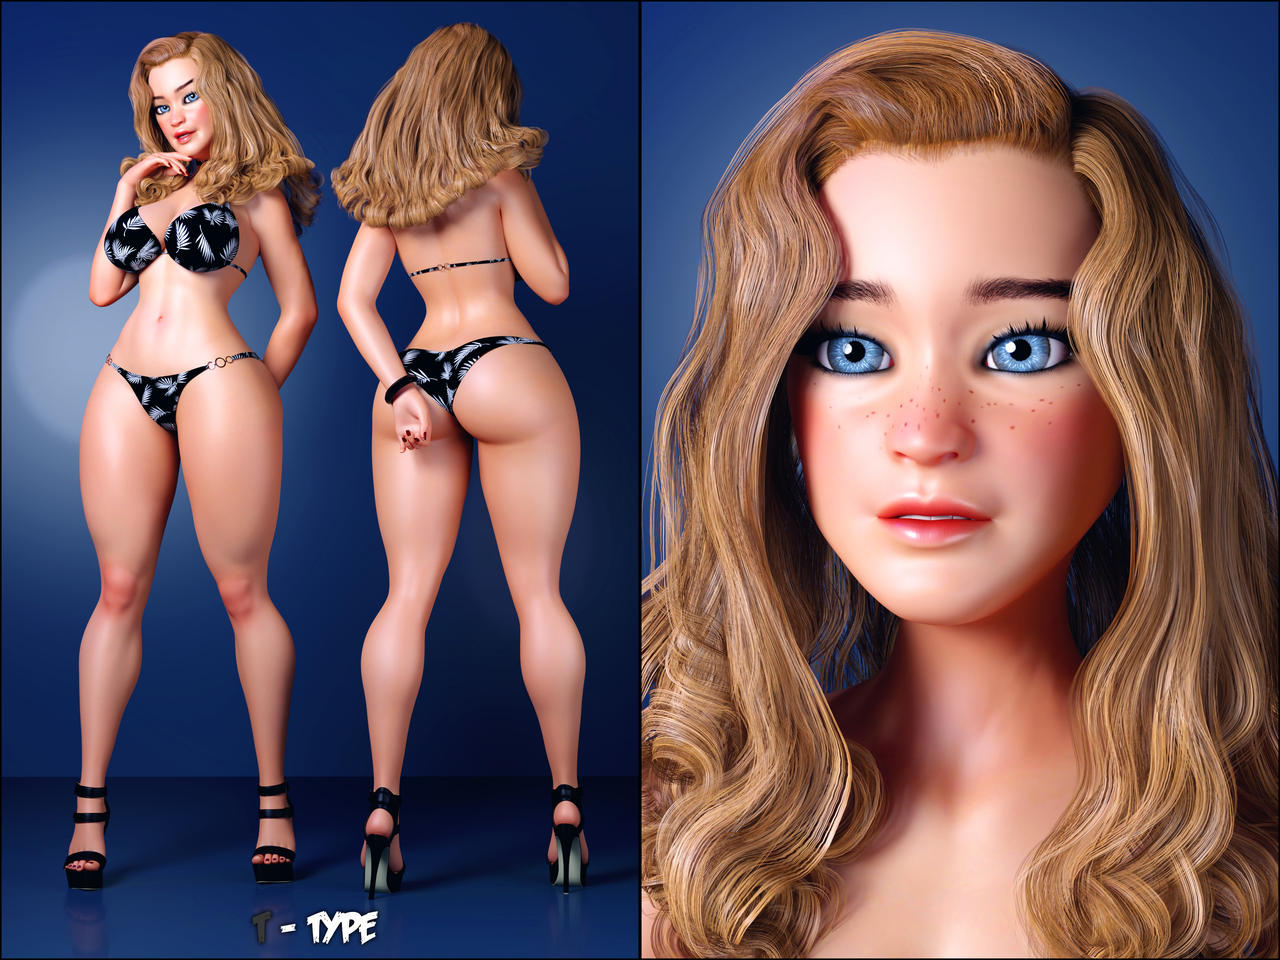 madonna, 3d, digital media (artwork), 1girls, ass, athletic, athletic female, big ass, big breasts, bottom heavy, breasts, busty, chest, cleavage, curvaceous, curvy, curvy figure, eyebrows, eyelashes, eyes, female, female focus, female only, fit, fit female, hair, hips, hourglass figure, huge ass, huge breasts, human, large ass, large breasts, legs, light-skinned female, light skin, lips, mature, mature female, slim waist, thick, thick legs, thick thighs, thighs, top heavy, upper body, urqqurqq, voluptuous, waist, wide hips, 